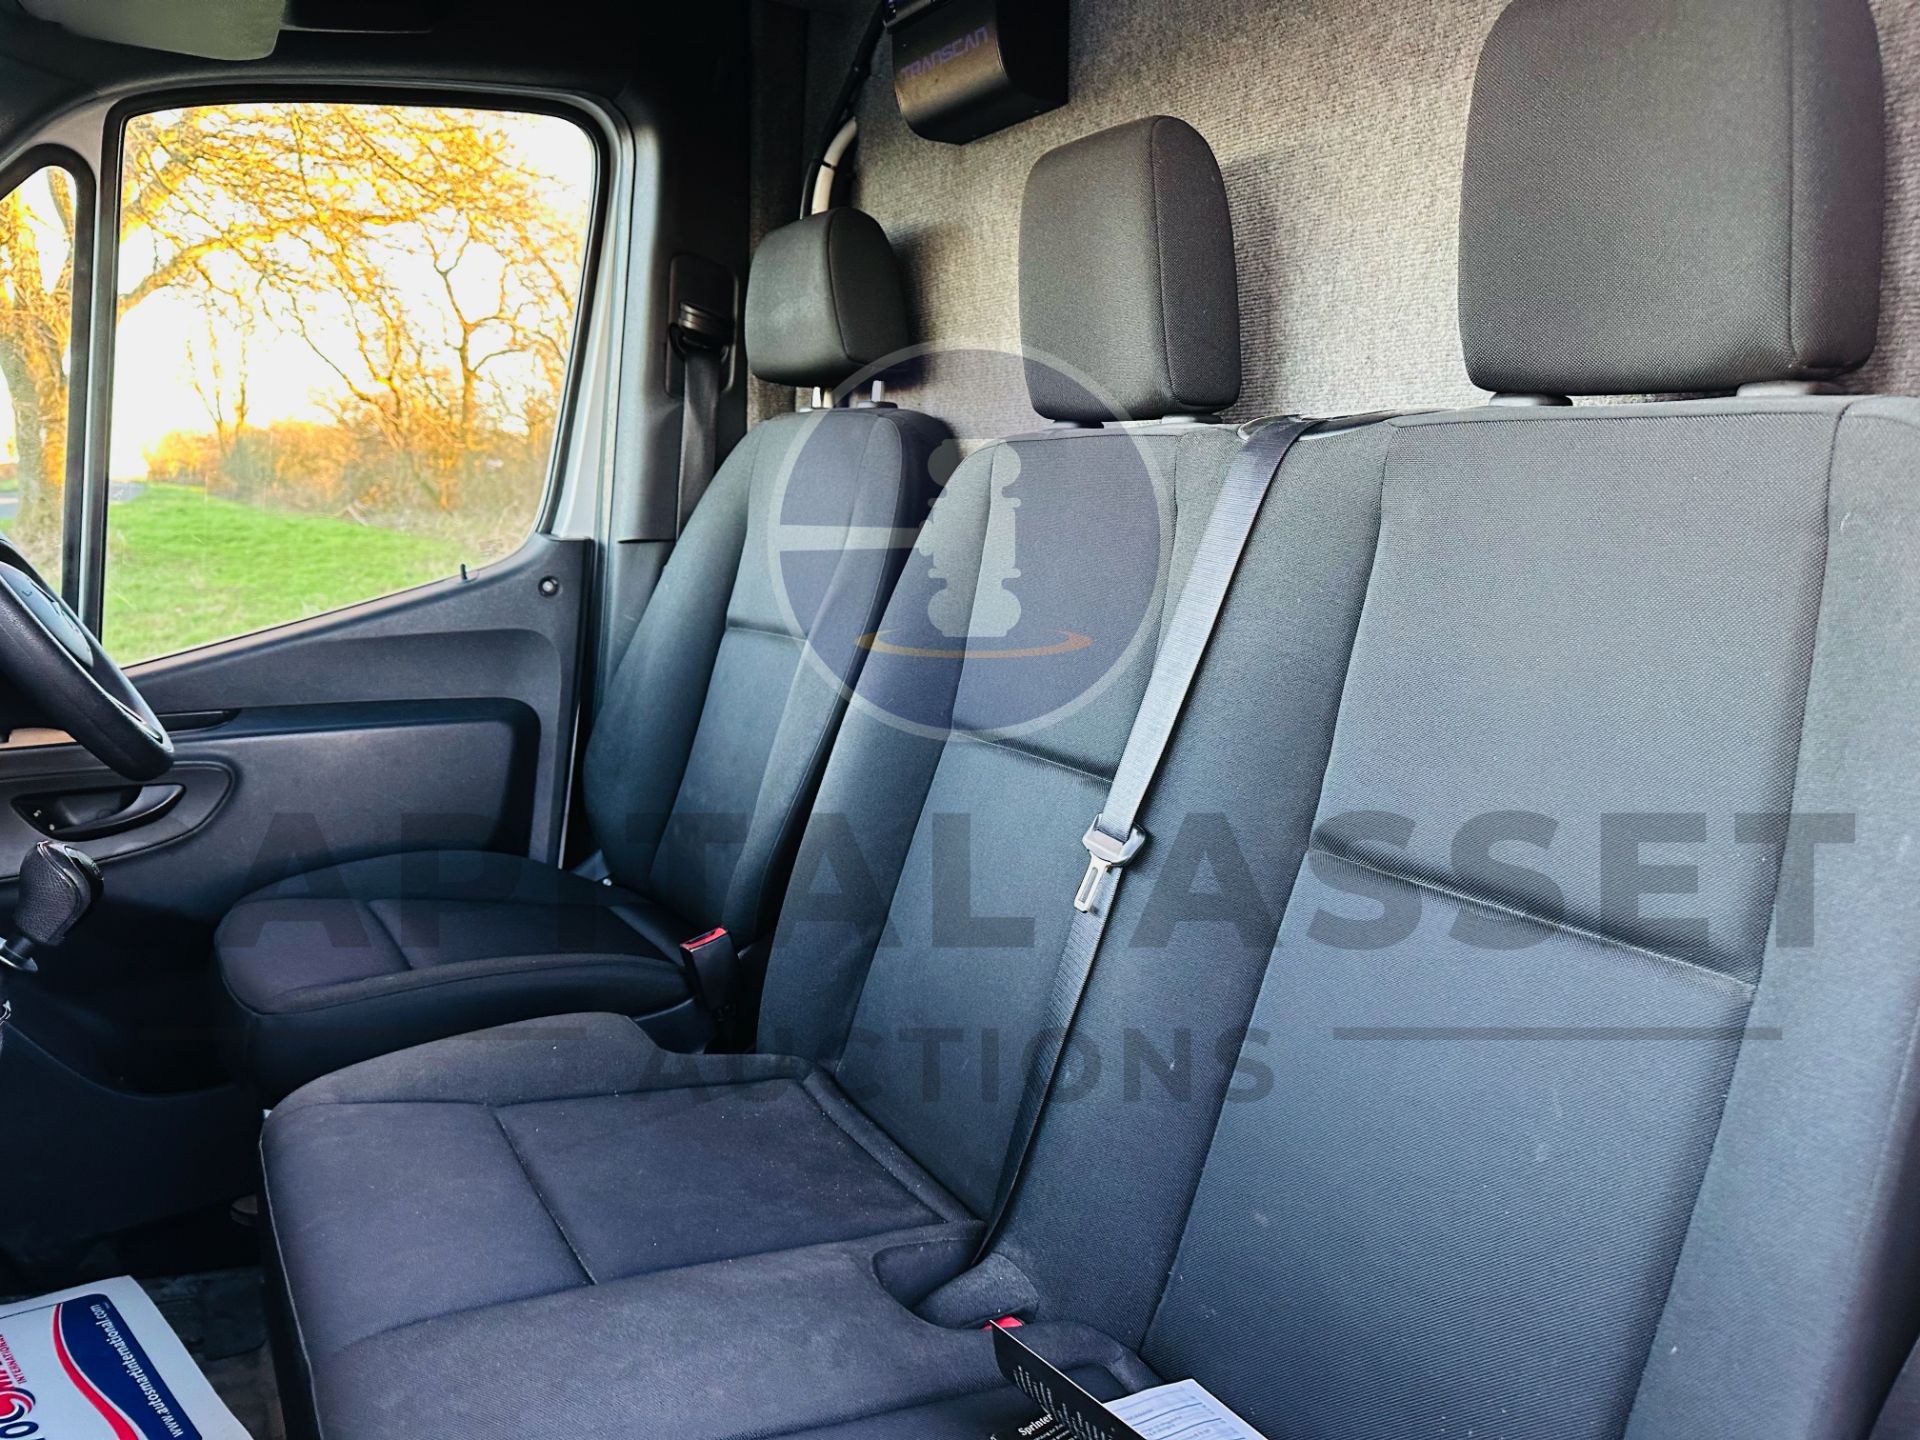 MERCEDES-BENZ SPRINTER 314 CDI *MWB - REFRIGERATED VAN* (2019 - FACELIFT MODEL) *OVERNIGHT STANDBY* - Image 17 of 33